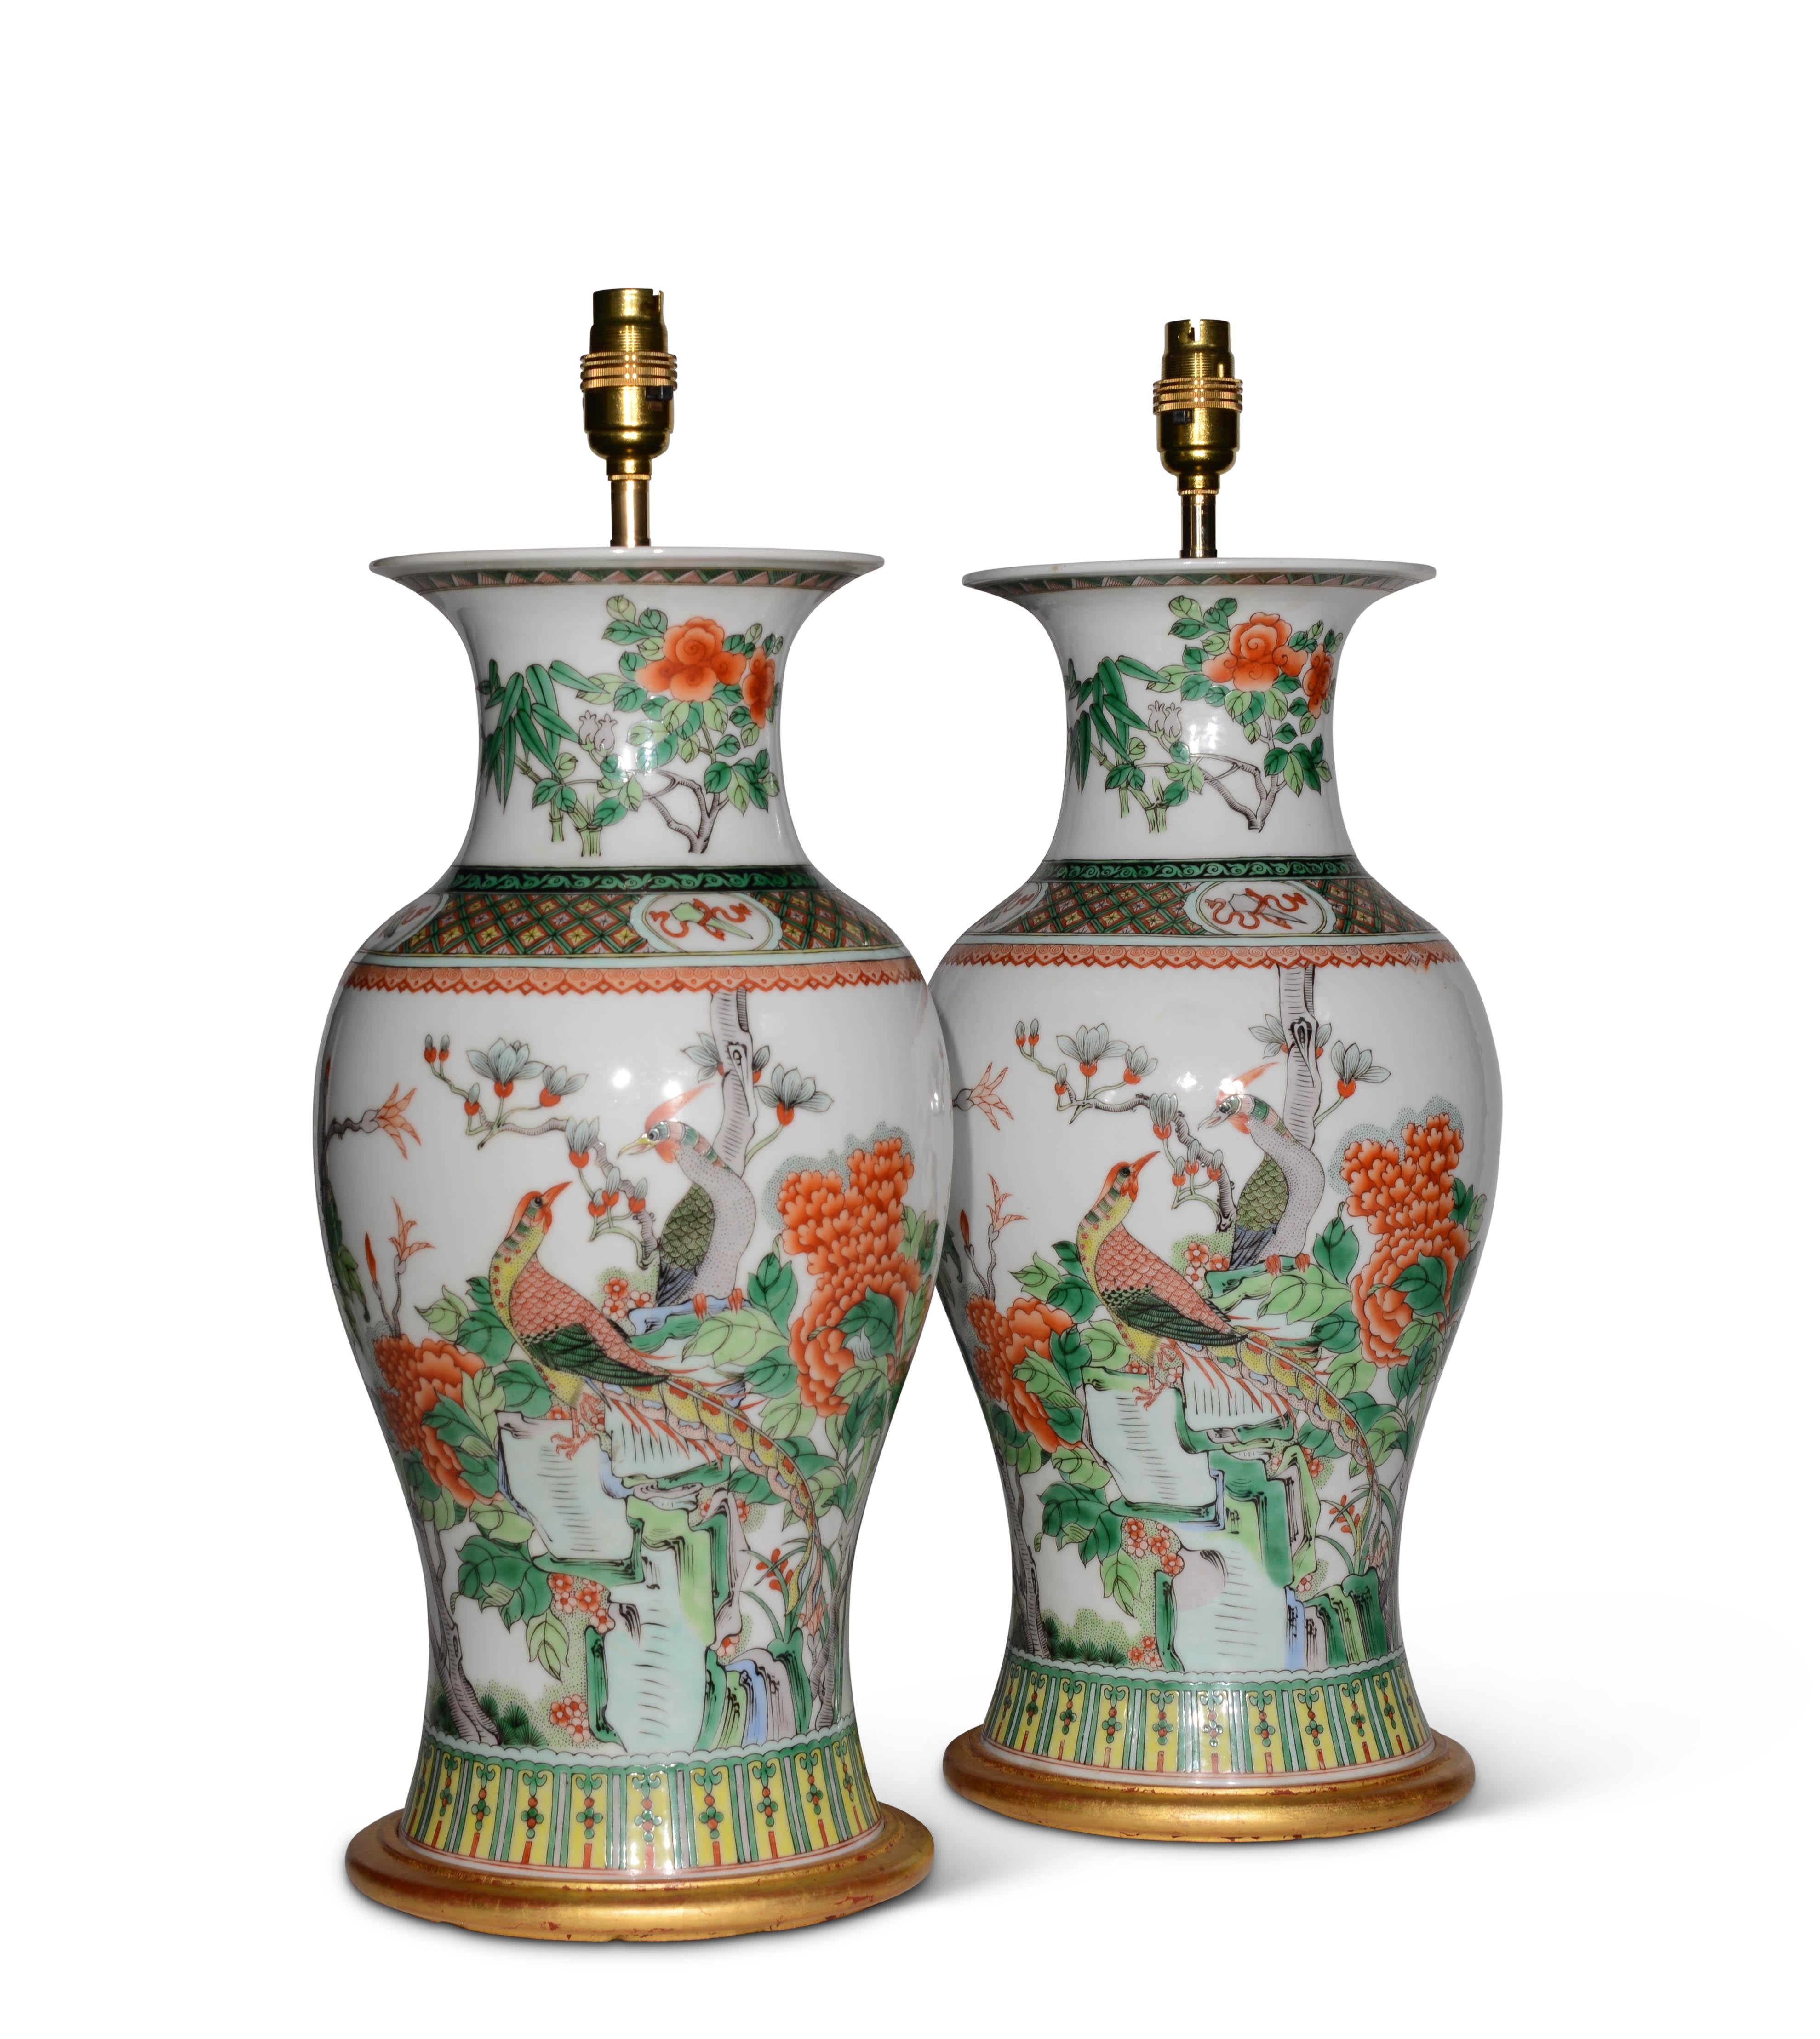 A fine pair of early 20th century Chinese famille verte baluster vases, decorated with exotic birds amongst trees and foliage and rocky outcrops with furthers stylised foliate detailing, predominantly in tones of green on a white background, now